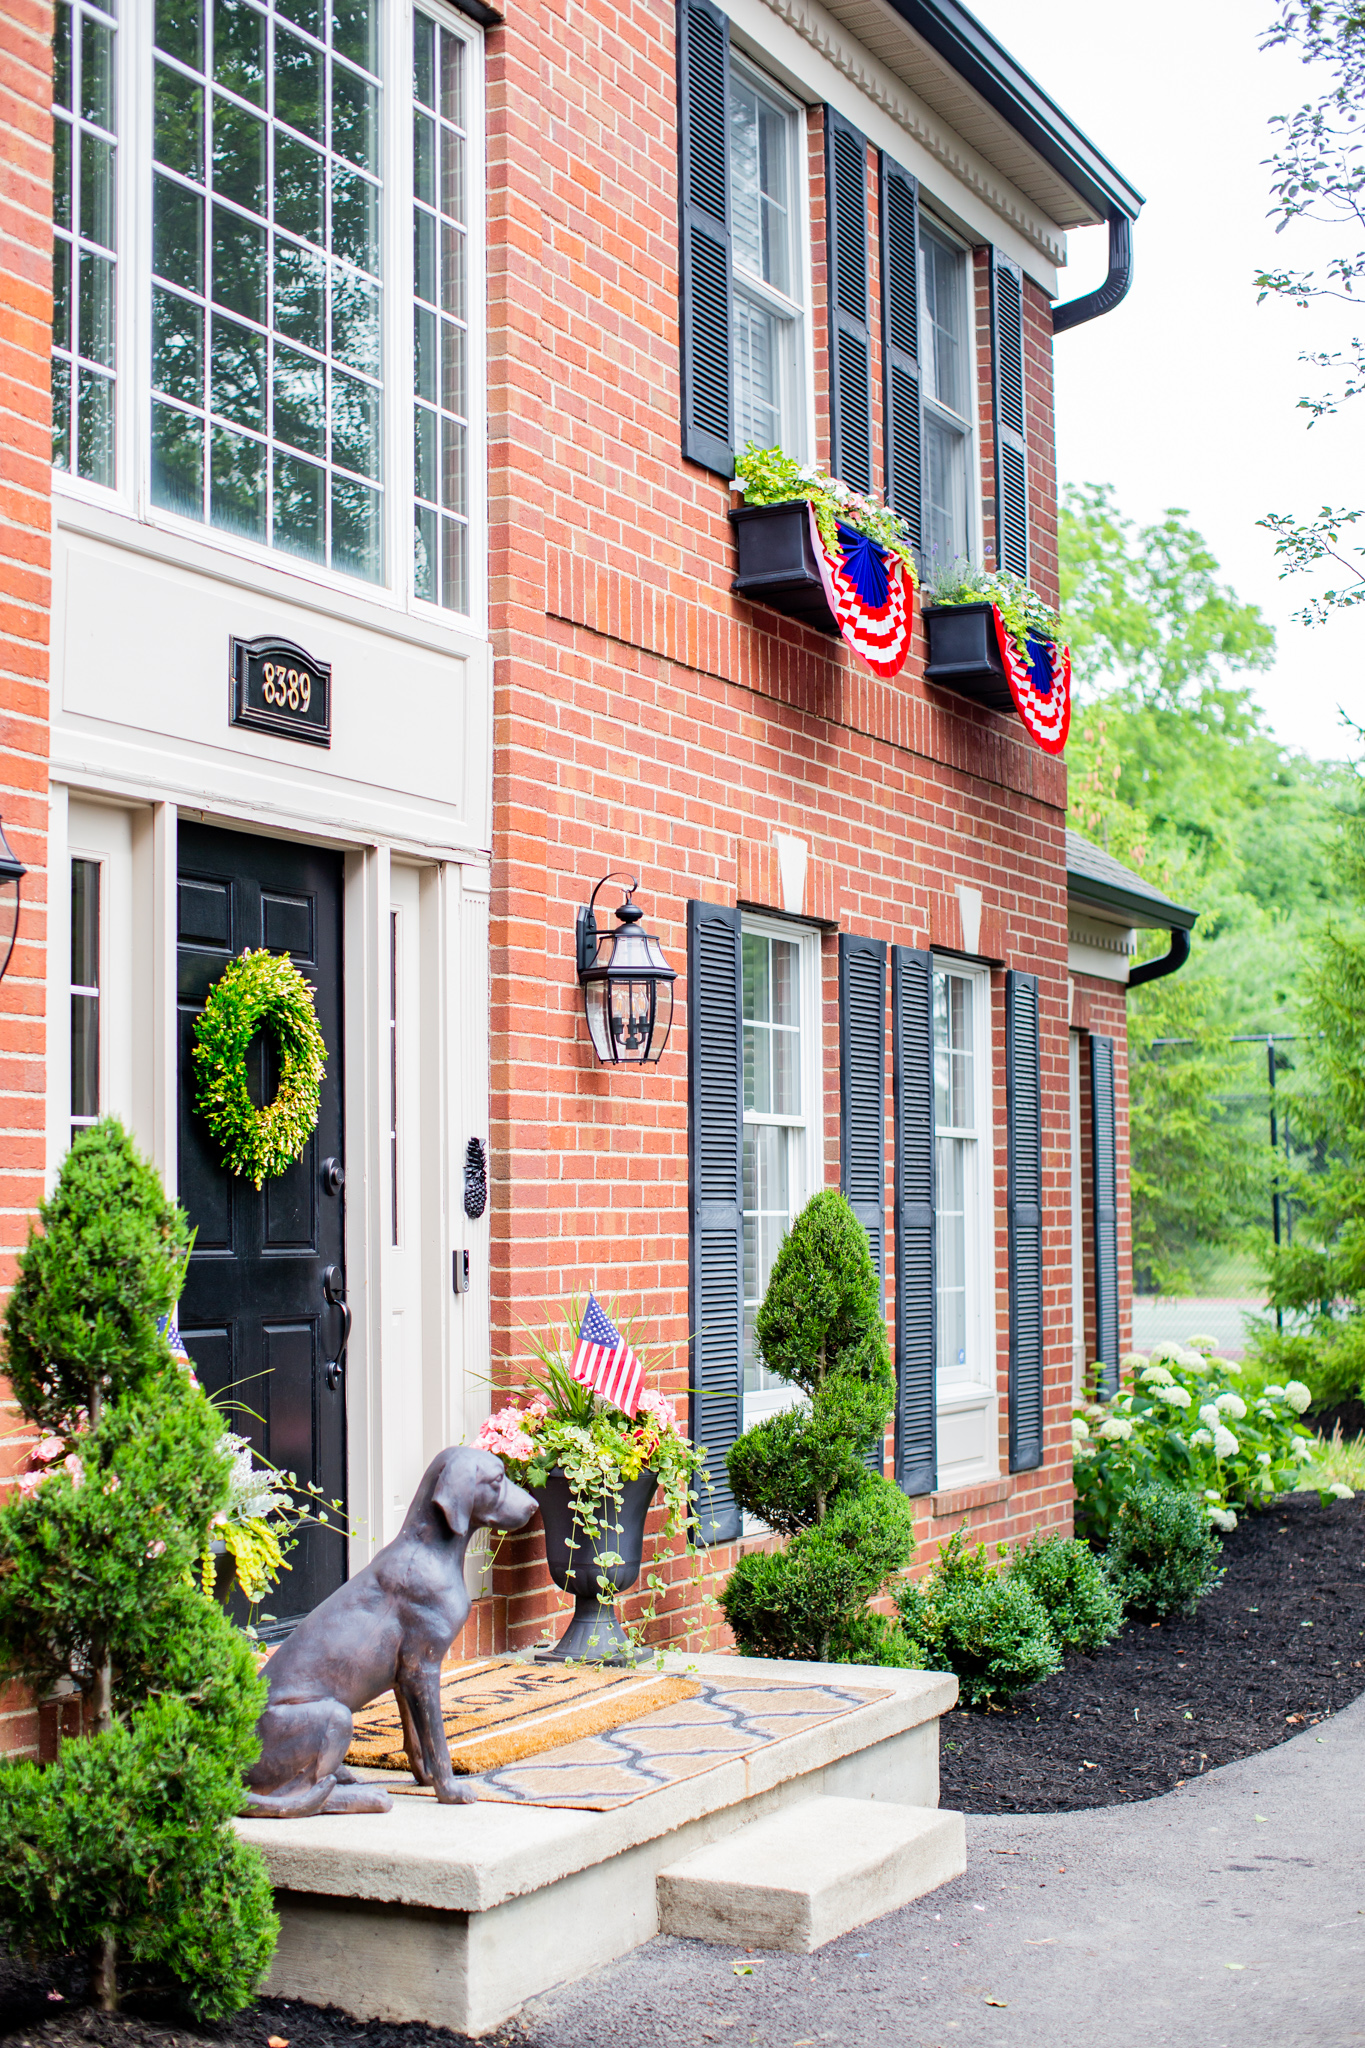 Front Porch by popular Ohio life and style blog, Coffee Beans and Bobby Pins: image of the front of a house decorated with American Flag bunting, Grandin Road Labrador Garden Statue, Grandin Road Hypnos Quatrefoil Outdoor Rug, Grandin Road Welcome Stripe Coir Door Mat, Grandin Road Sidney Urn/Planter, Grandin Road Soft Vine Wreath, Grandin Road Large Cambridge Single Line Wall Address Plaque, Grandin Road Devon Self-watering Window Box Planter, and Grandin Road Devon Tapered Planter.